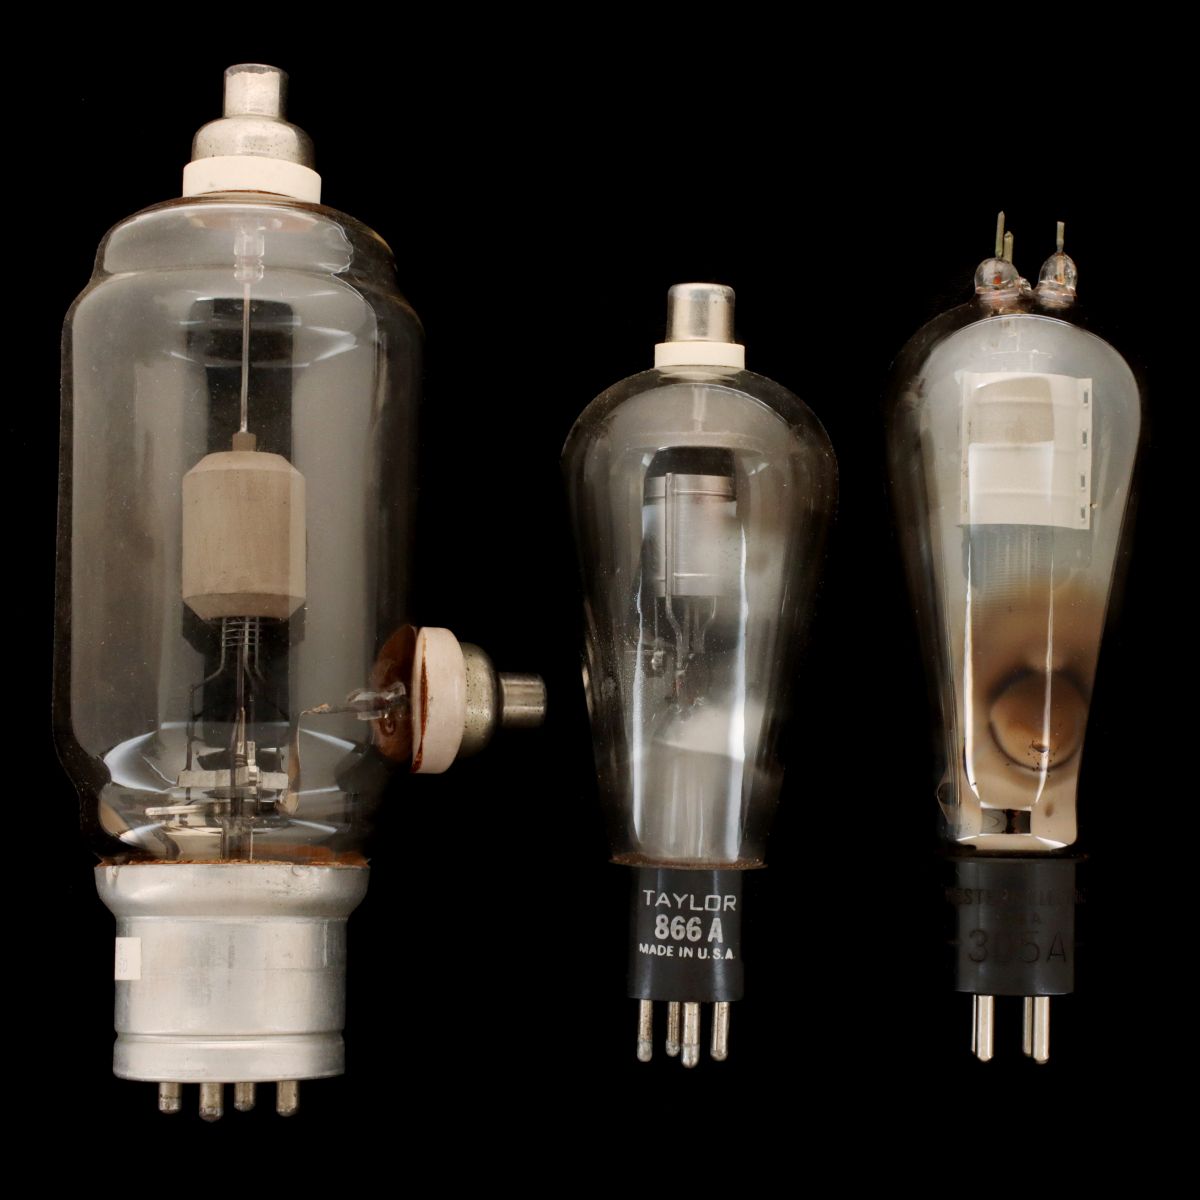 AN ODD WESTINGHOUSE 305A VACUUM TUBE IN BOX WITH OTHERS